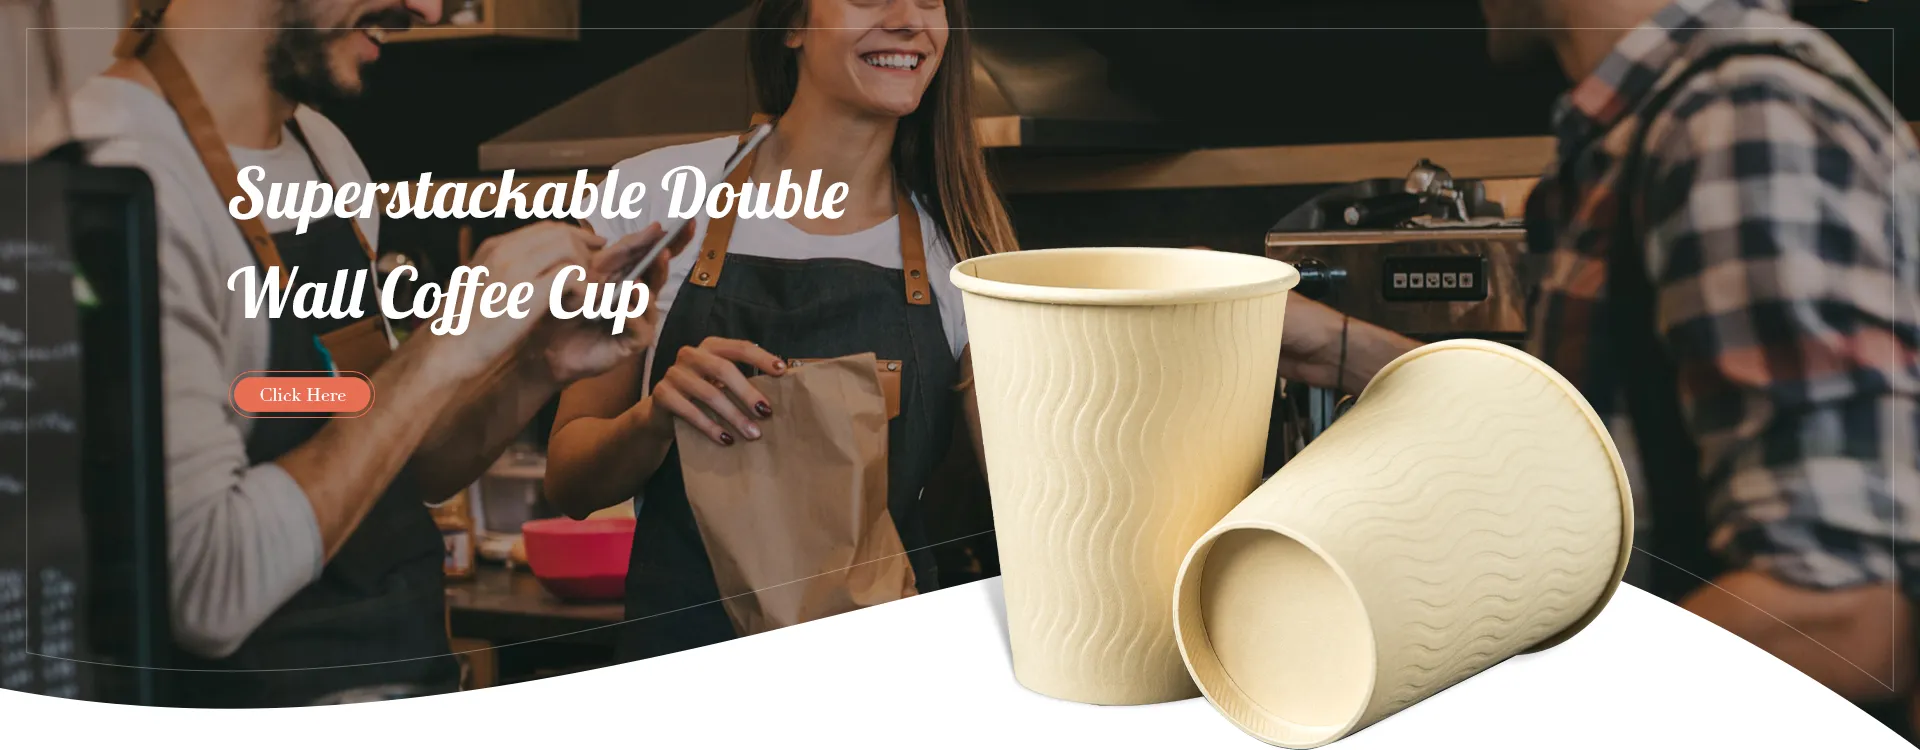 Superstackable Double Wall Coffee Cup